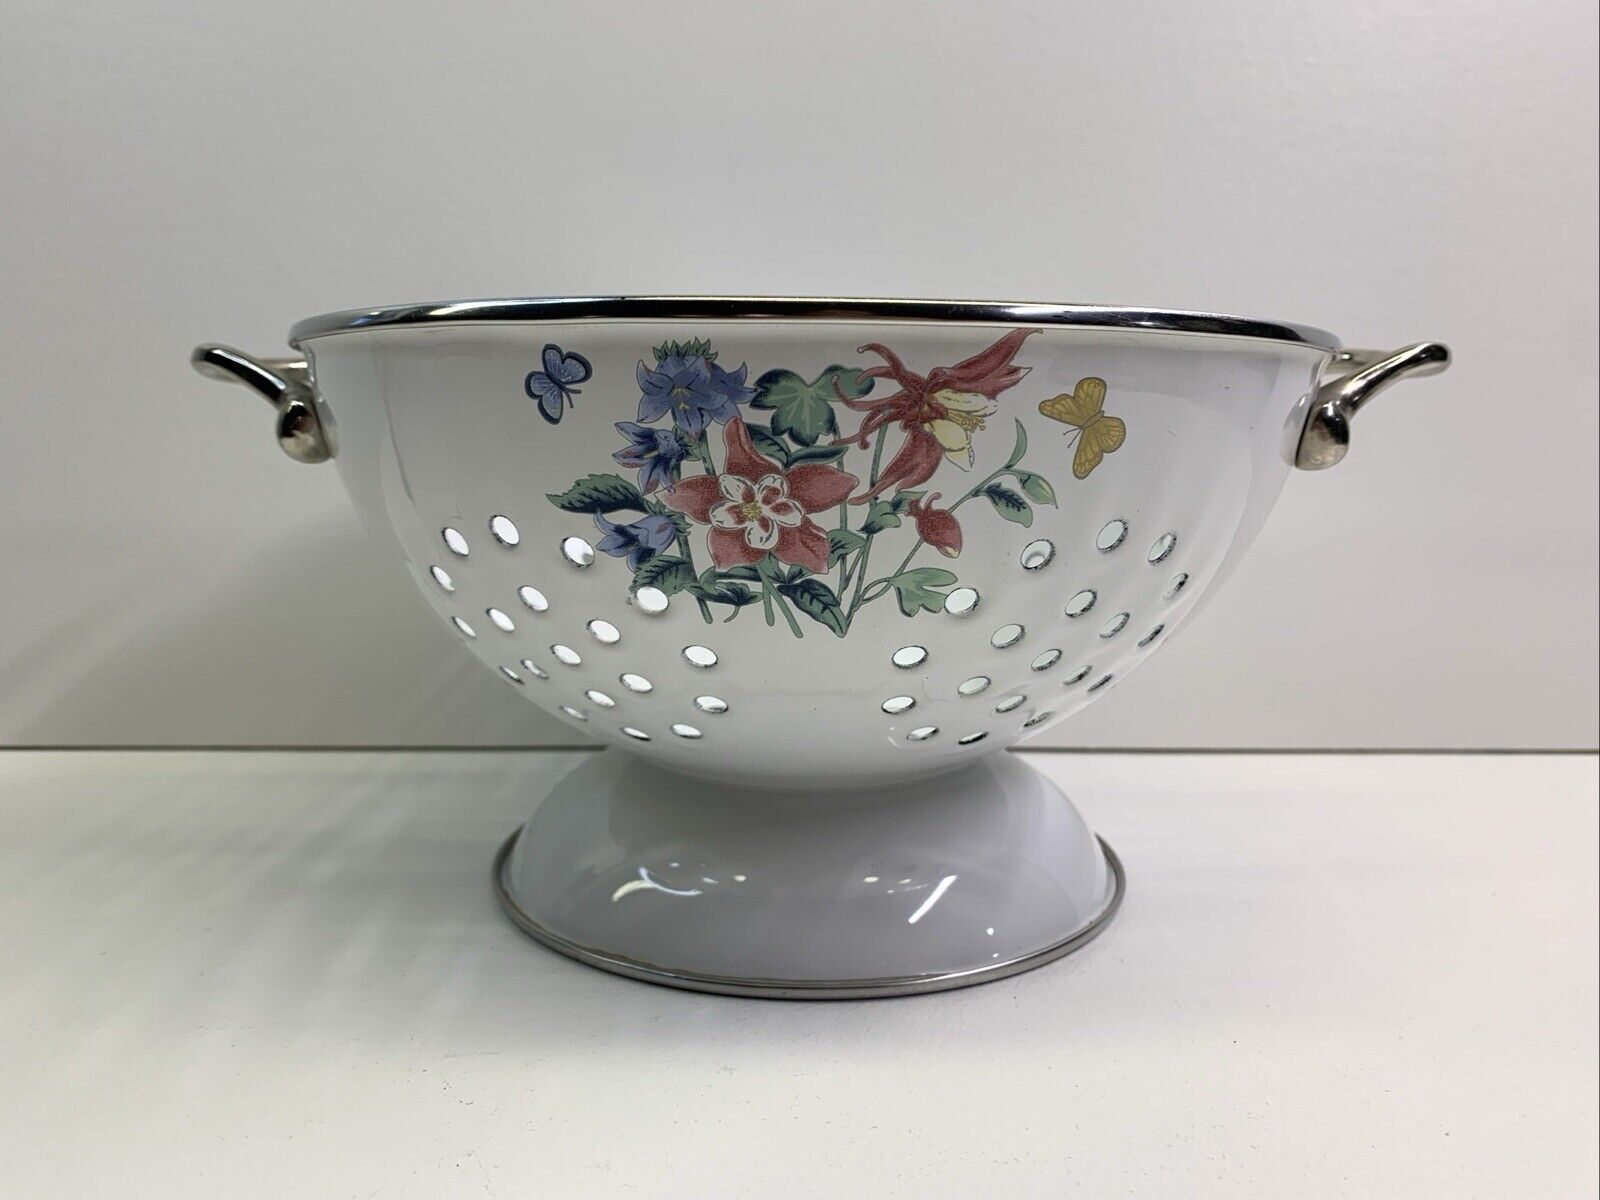 Vintage Metal Colander With Flowers and Butterflies Kitchen Decor